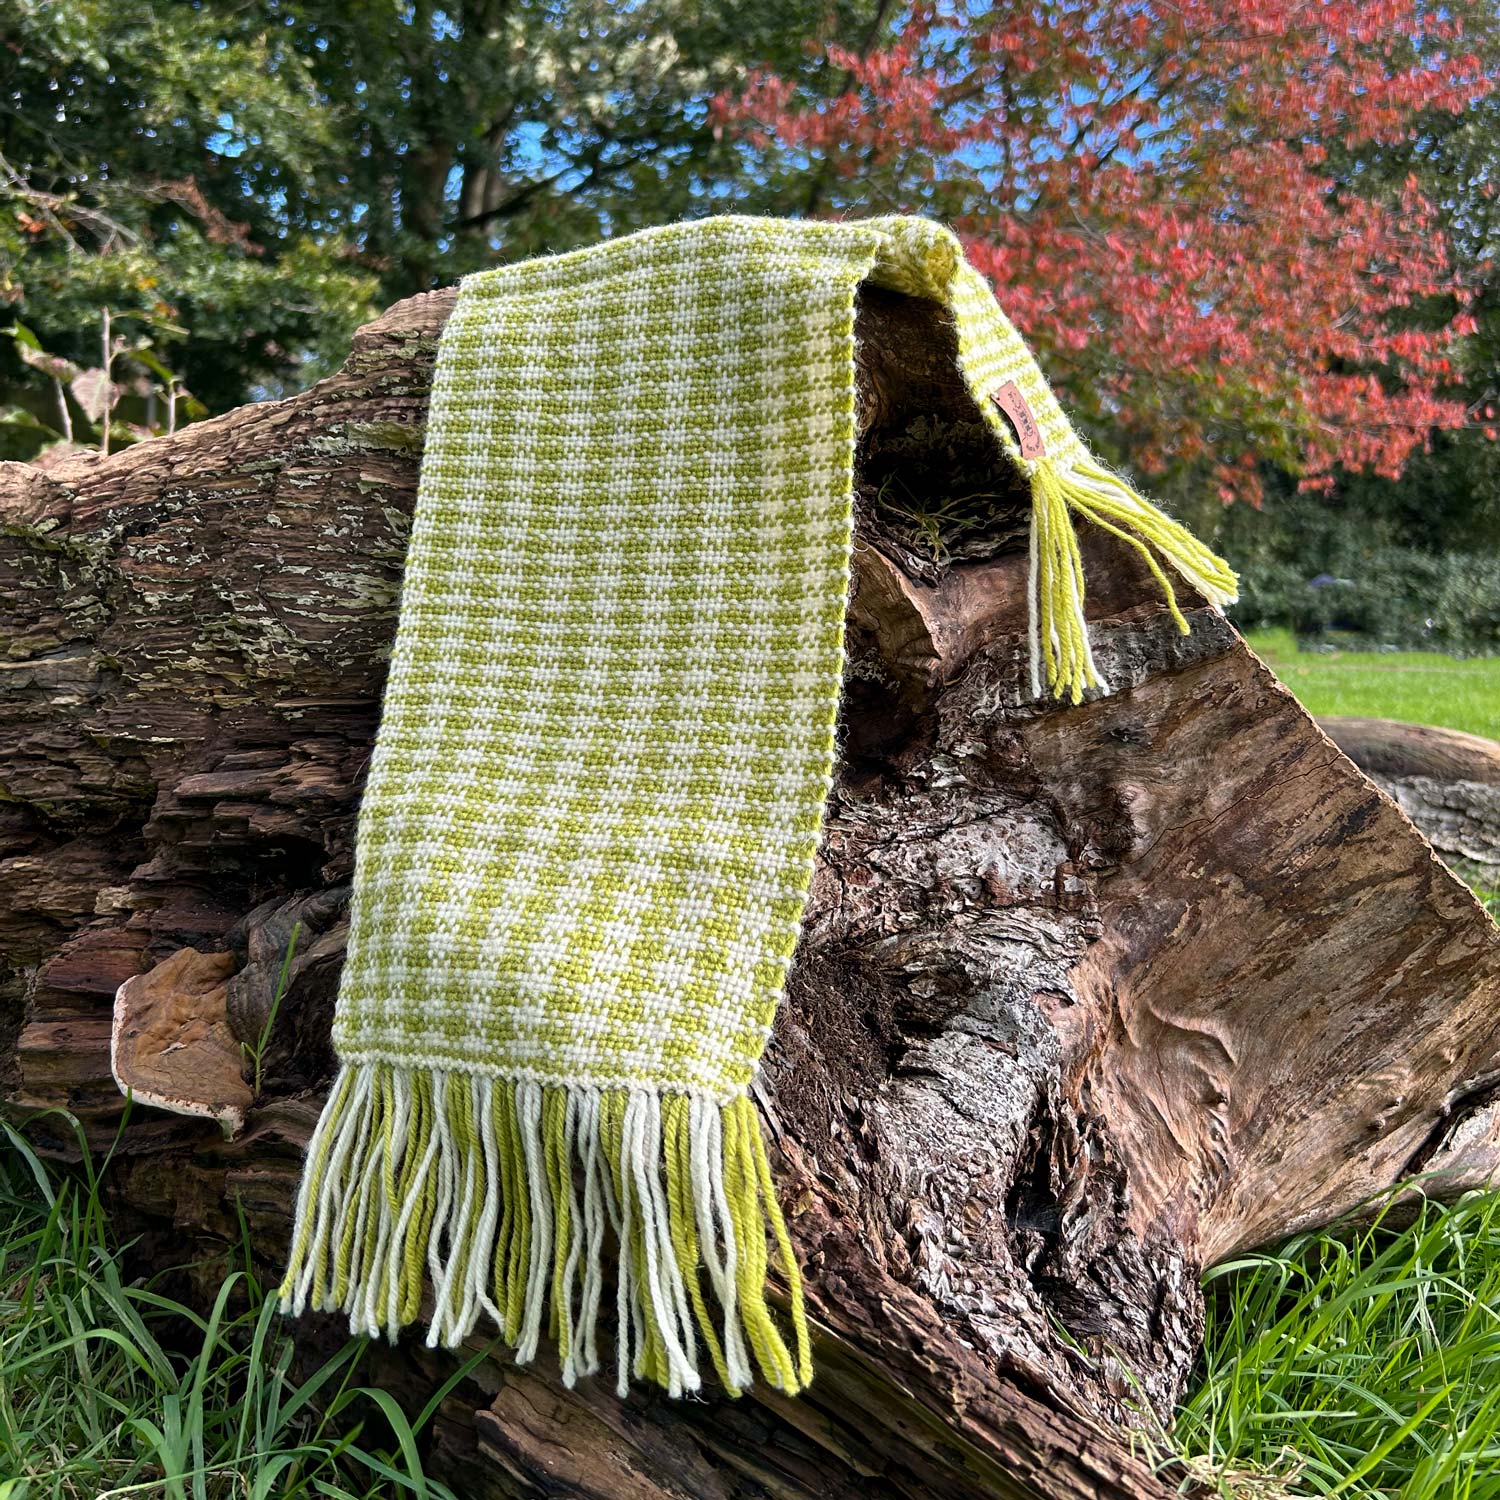 Scarf - 100% Wool - Handwoven - Welsh Checked - Green & Cream